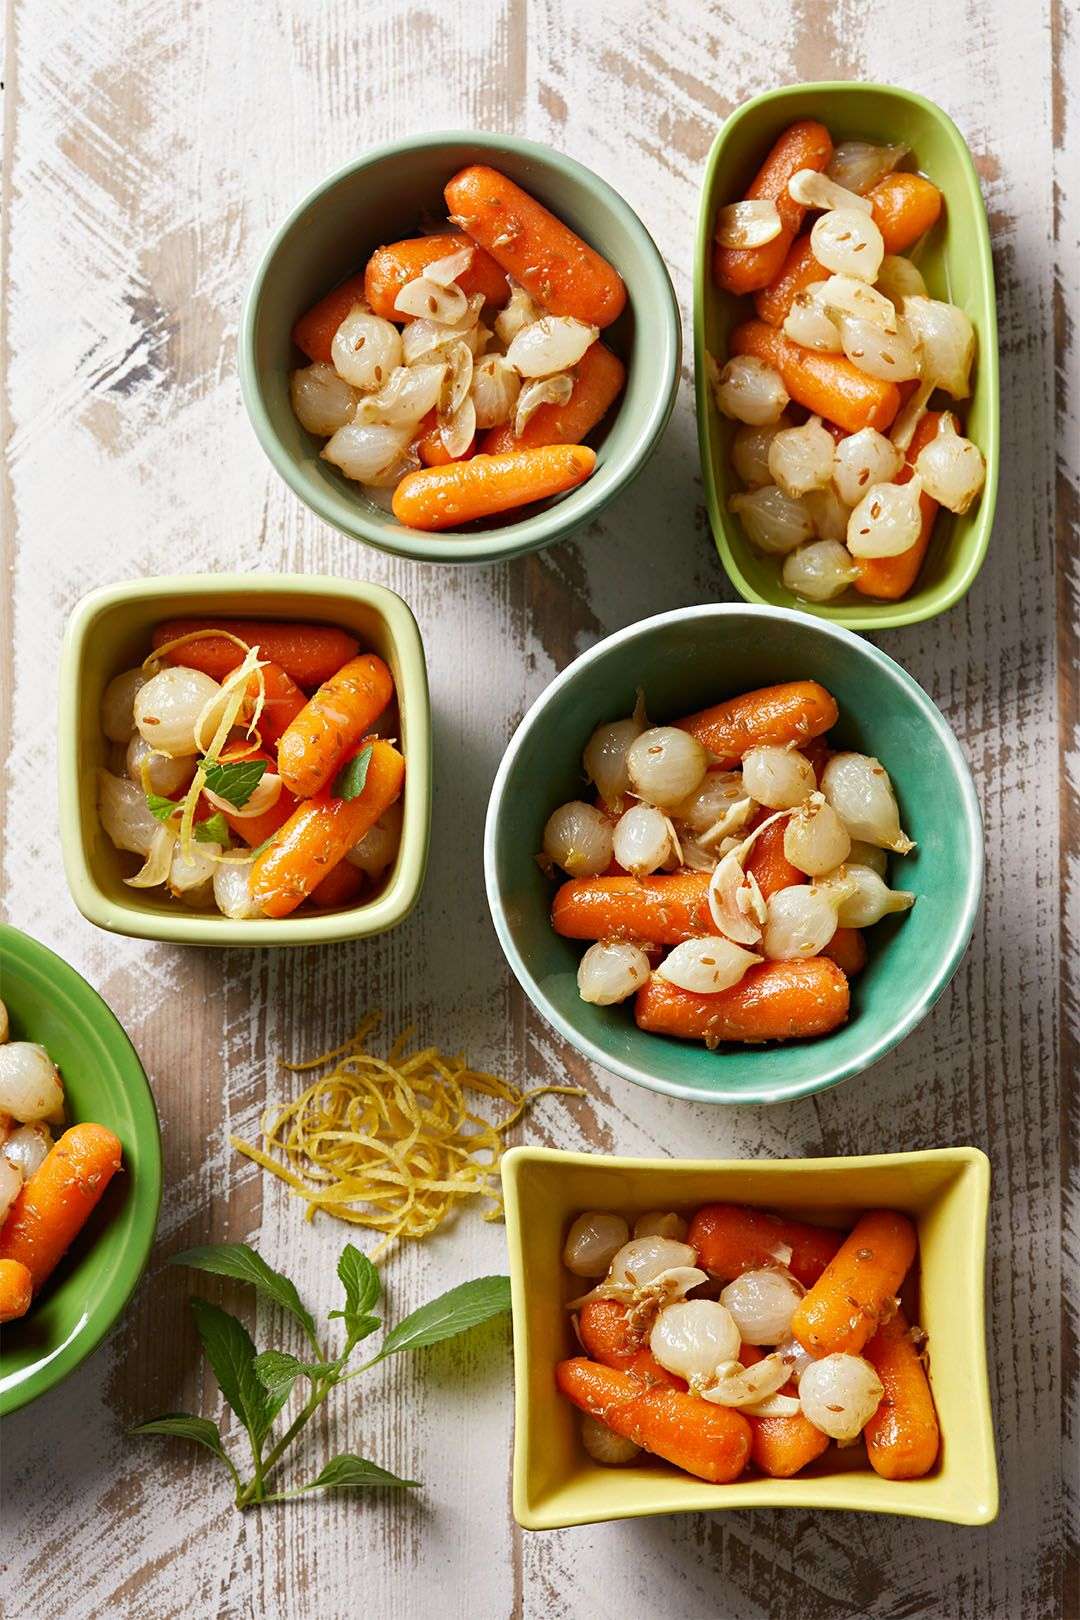 Yep, You Can Cook These 11 Vegetables in Your Instant Pot ...